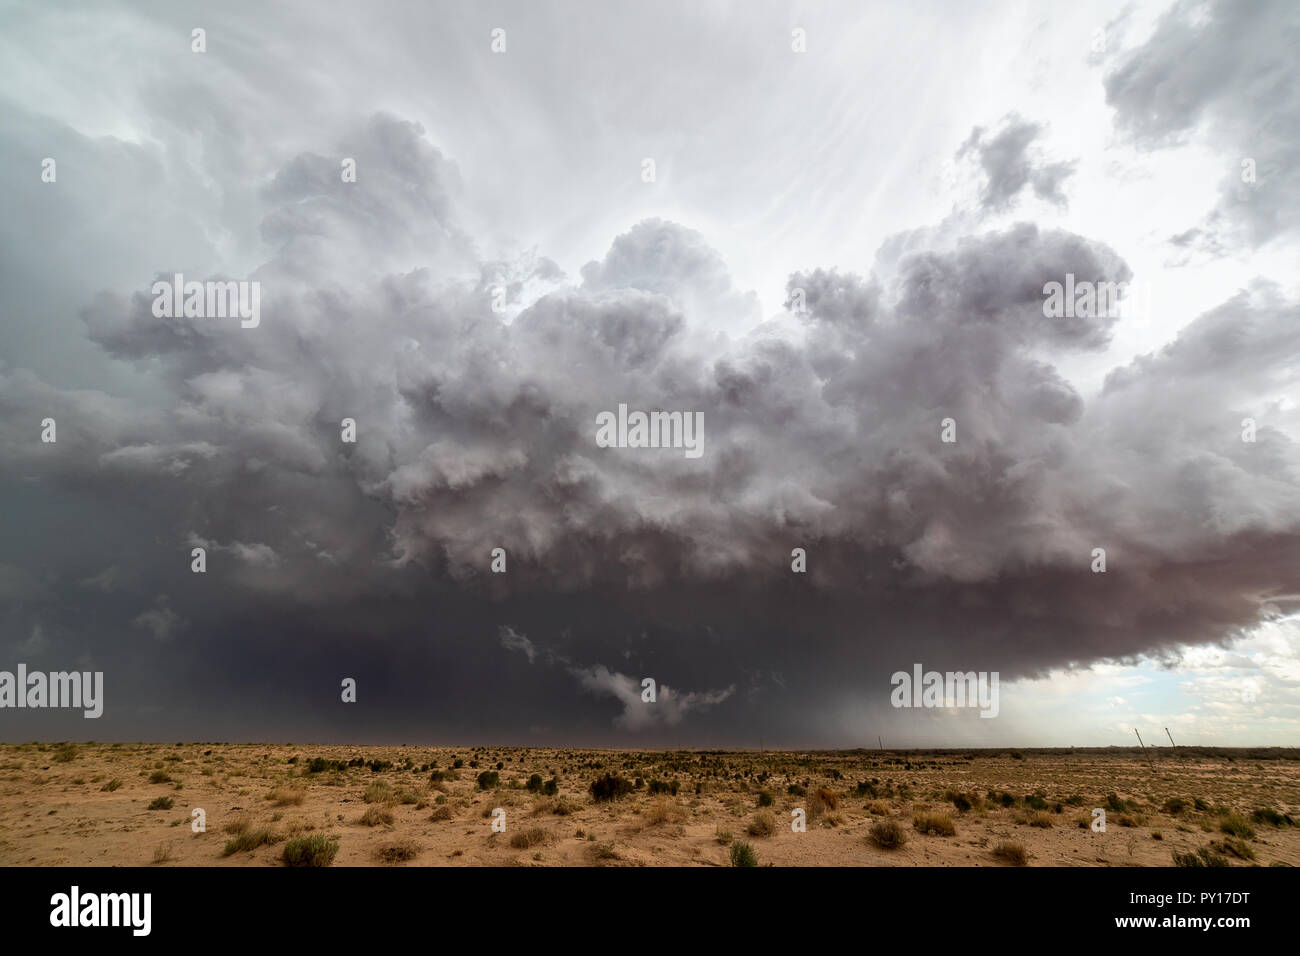 Dramatic storm clouds and dark stormy sky Stock Photo